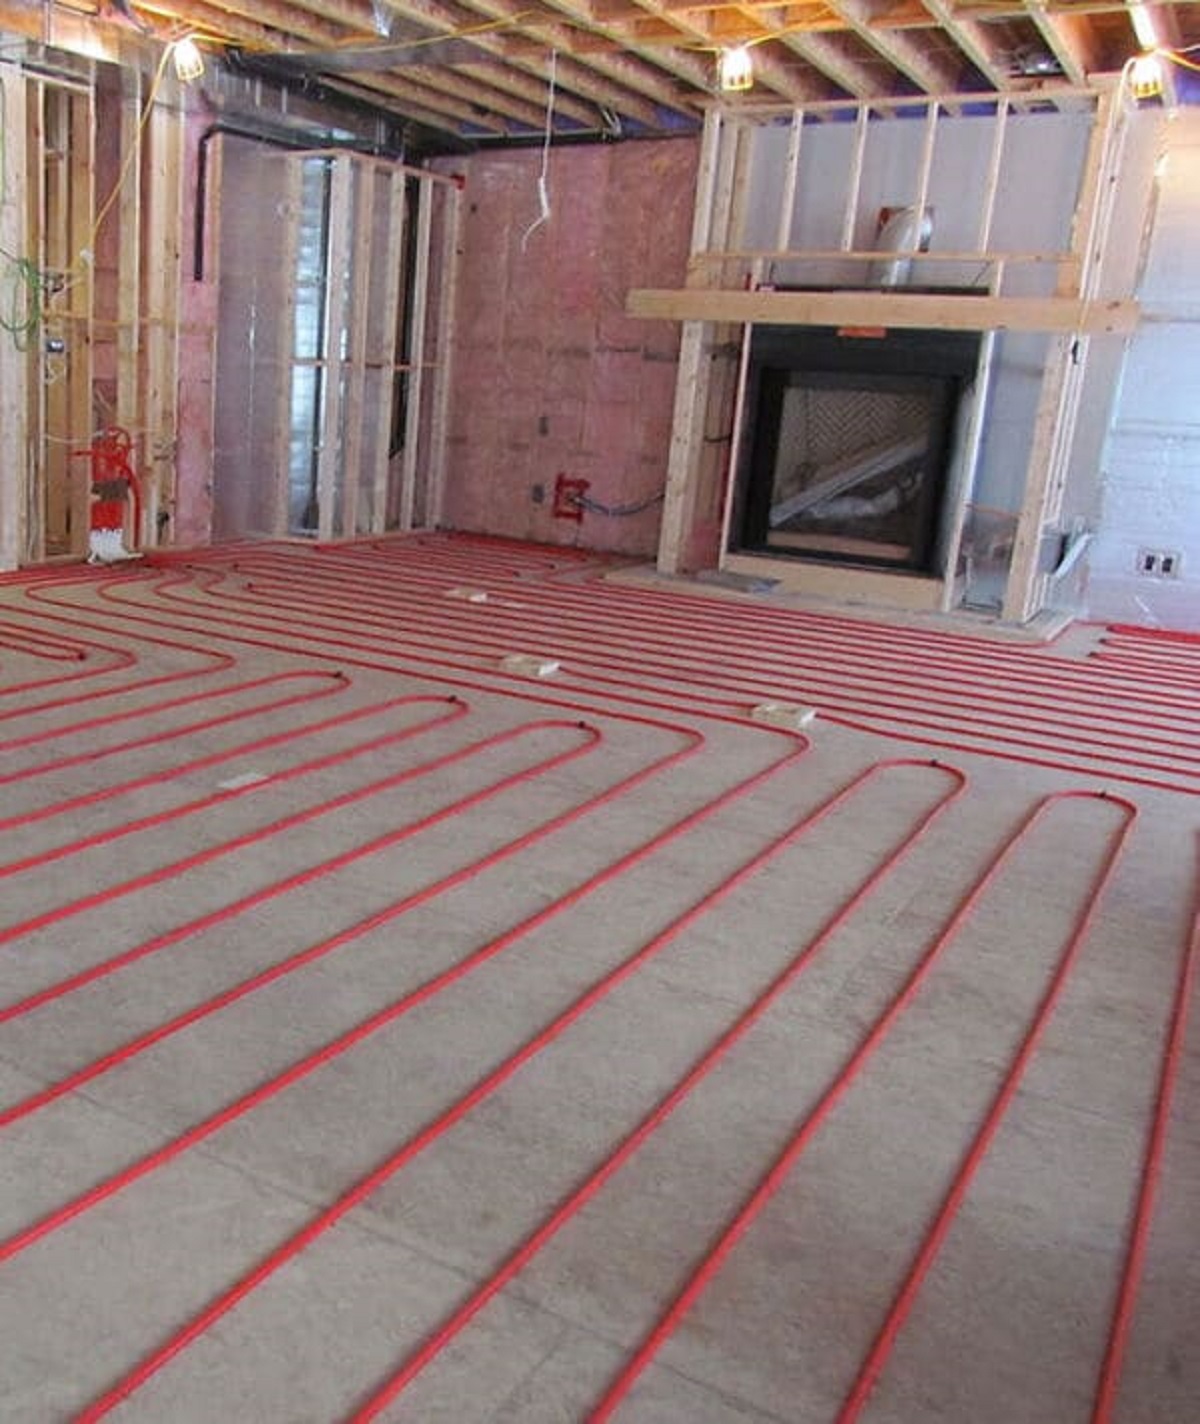 “That’s What A Heated Floor Looks Like Before The Hard Floory Stuff Is Put On Top”